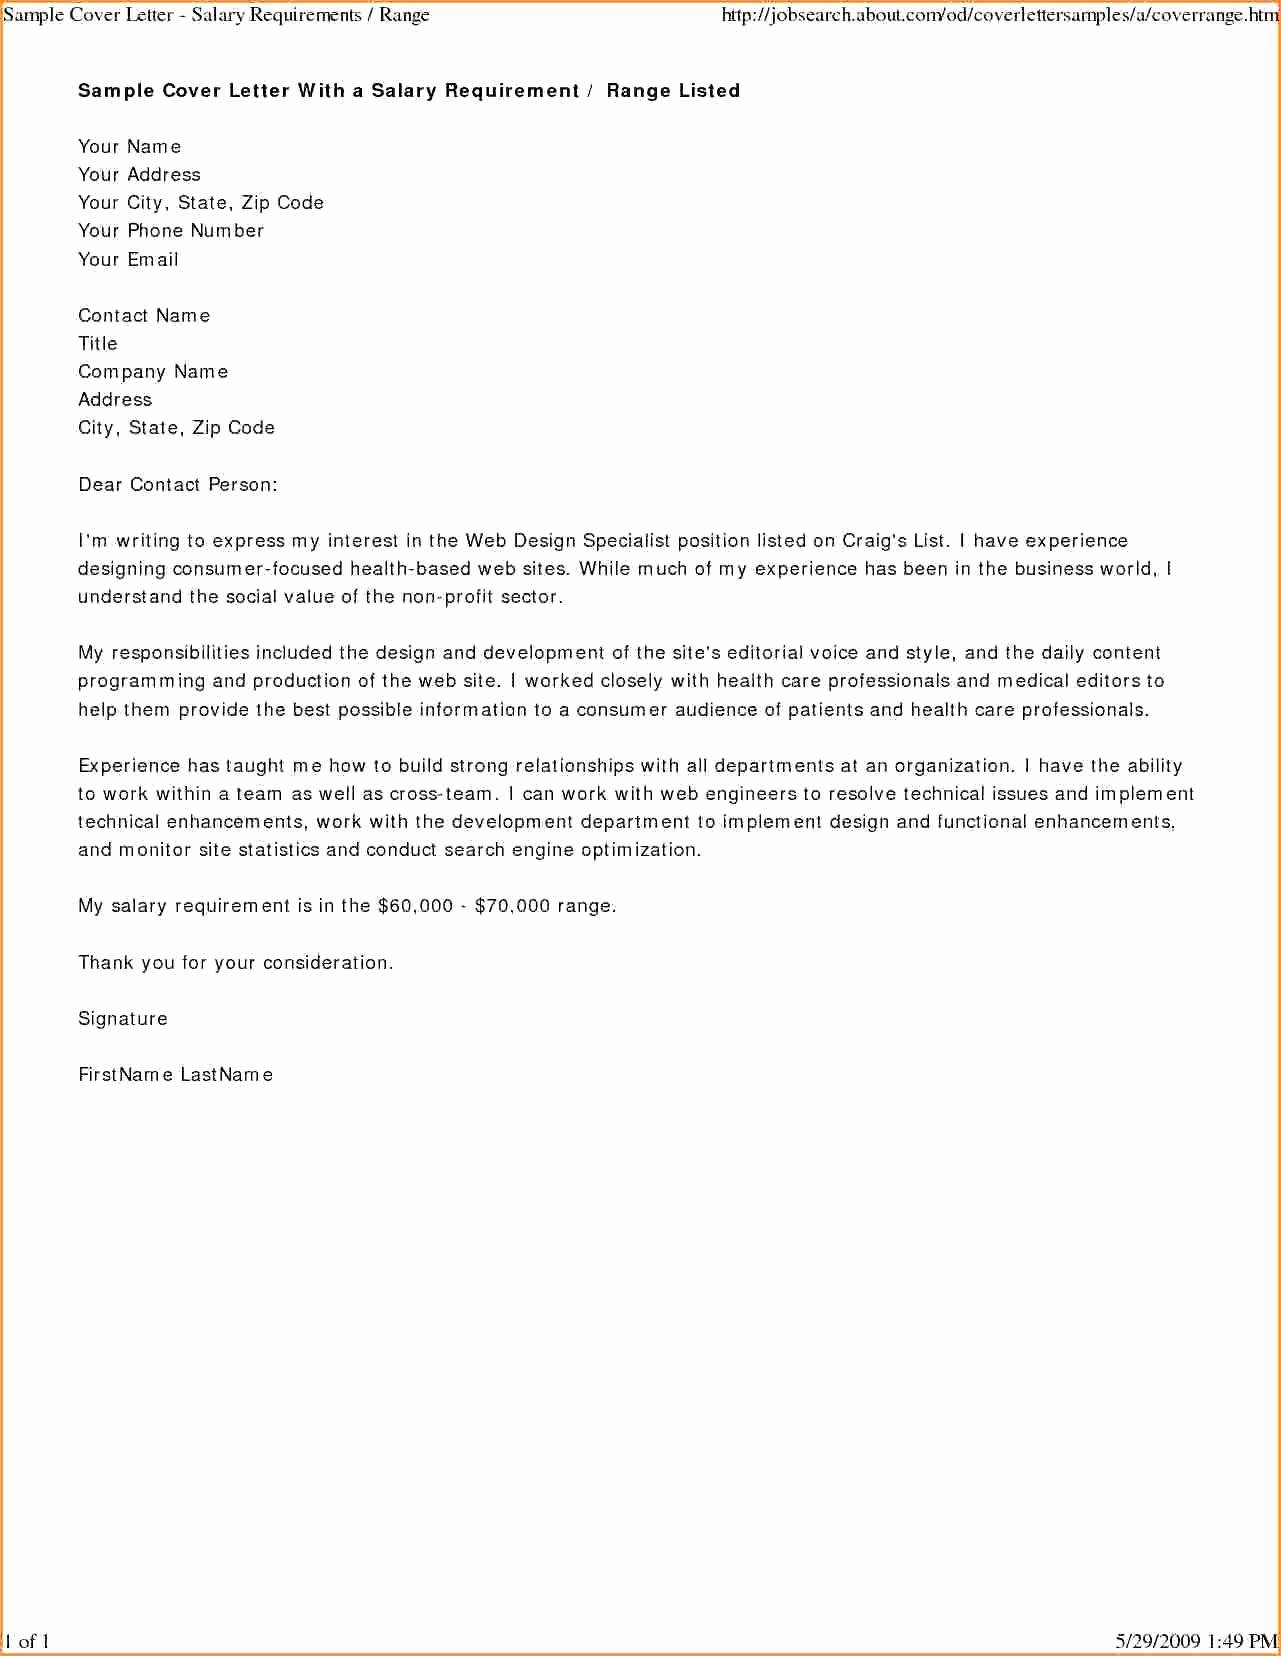 Microsoft Word Cover Letter Templates New Free Fax Cover Letter Template Word Collection